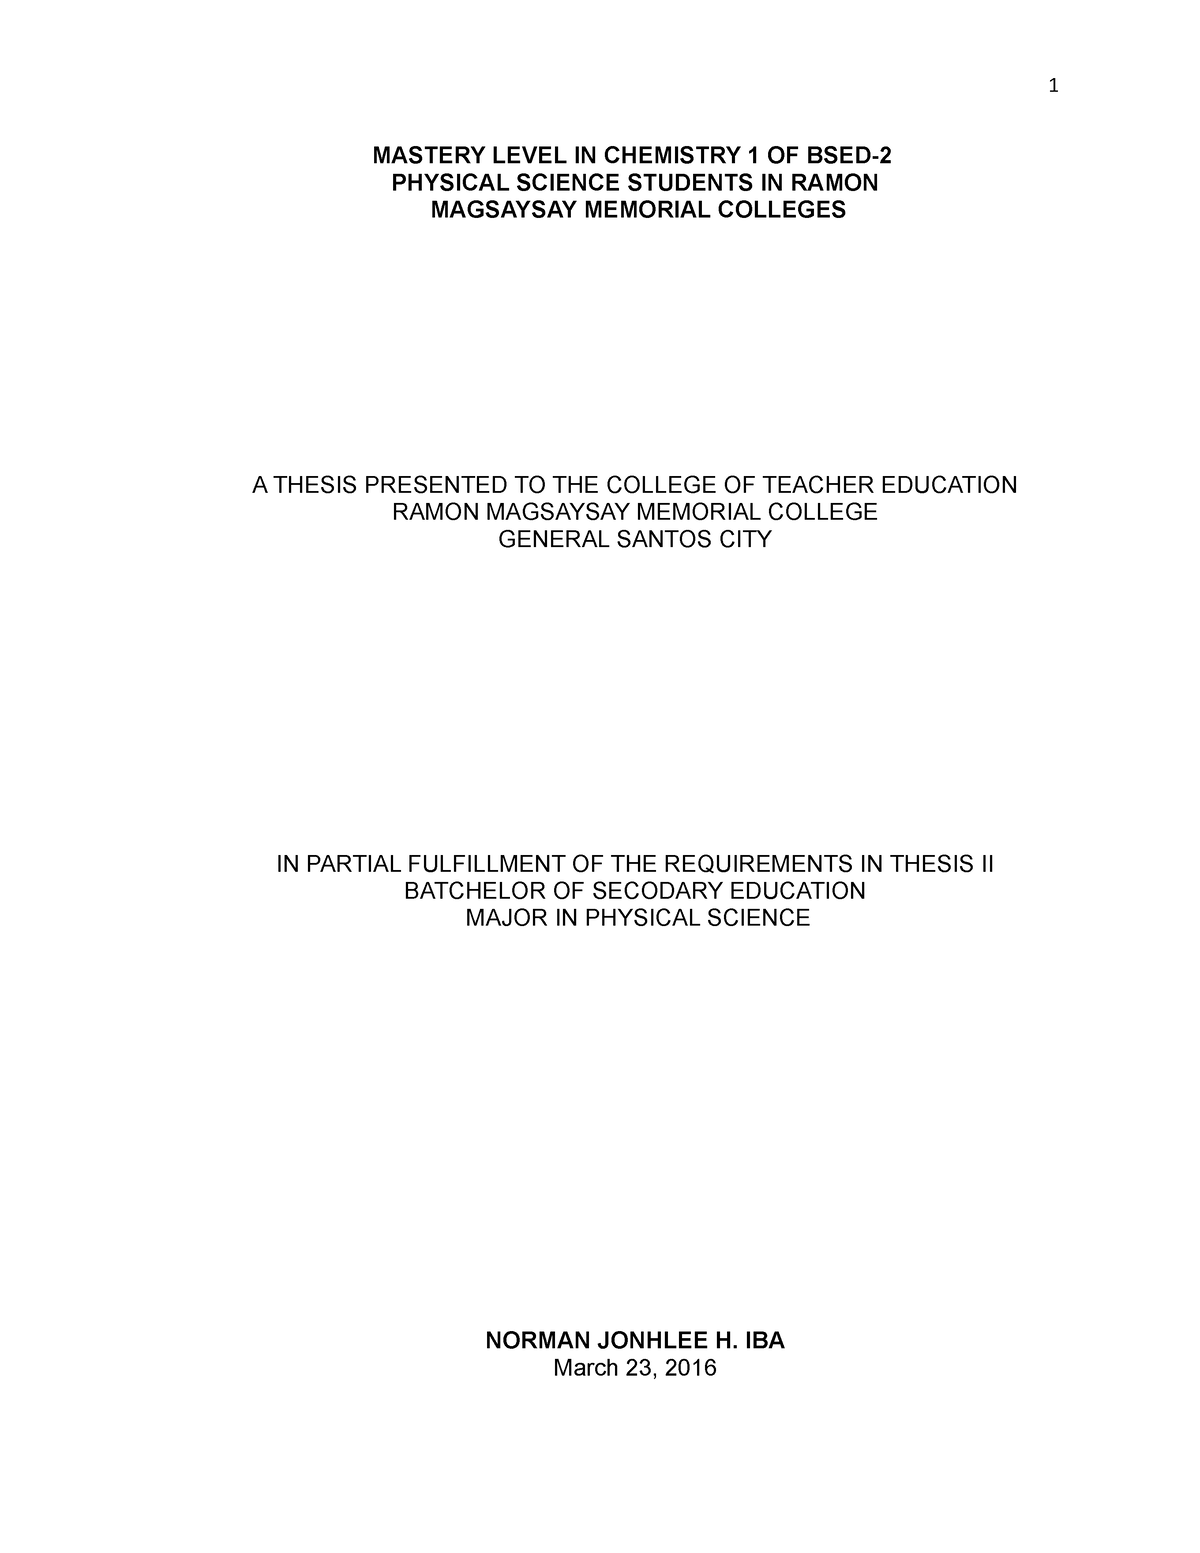 chemistry master thesis